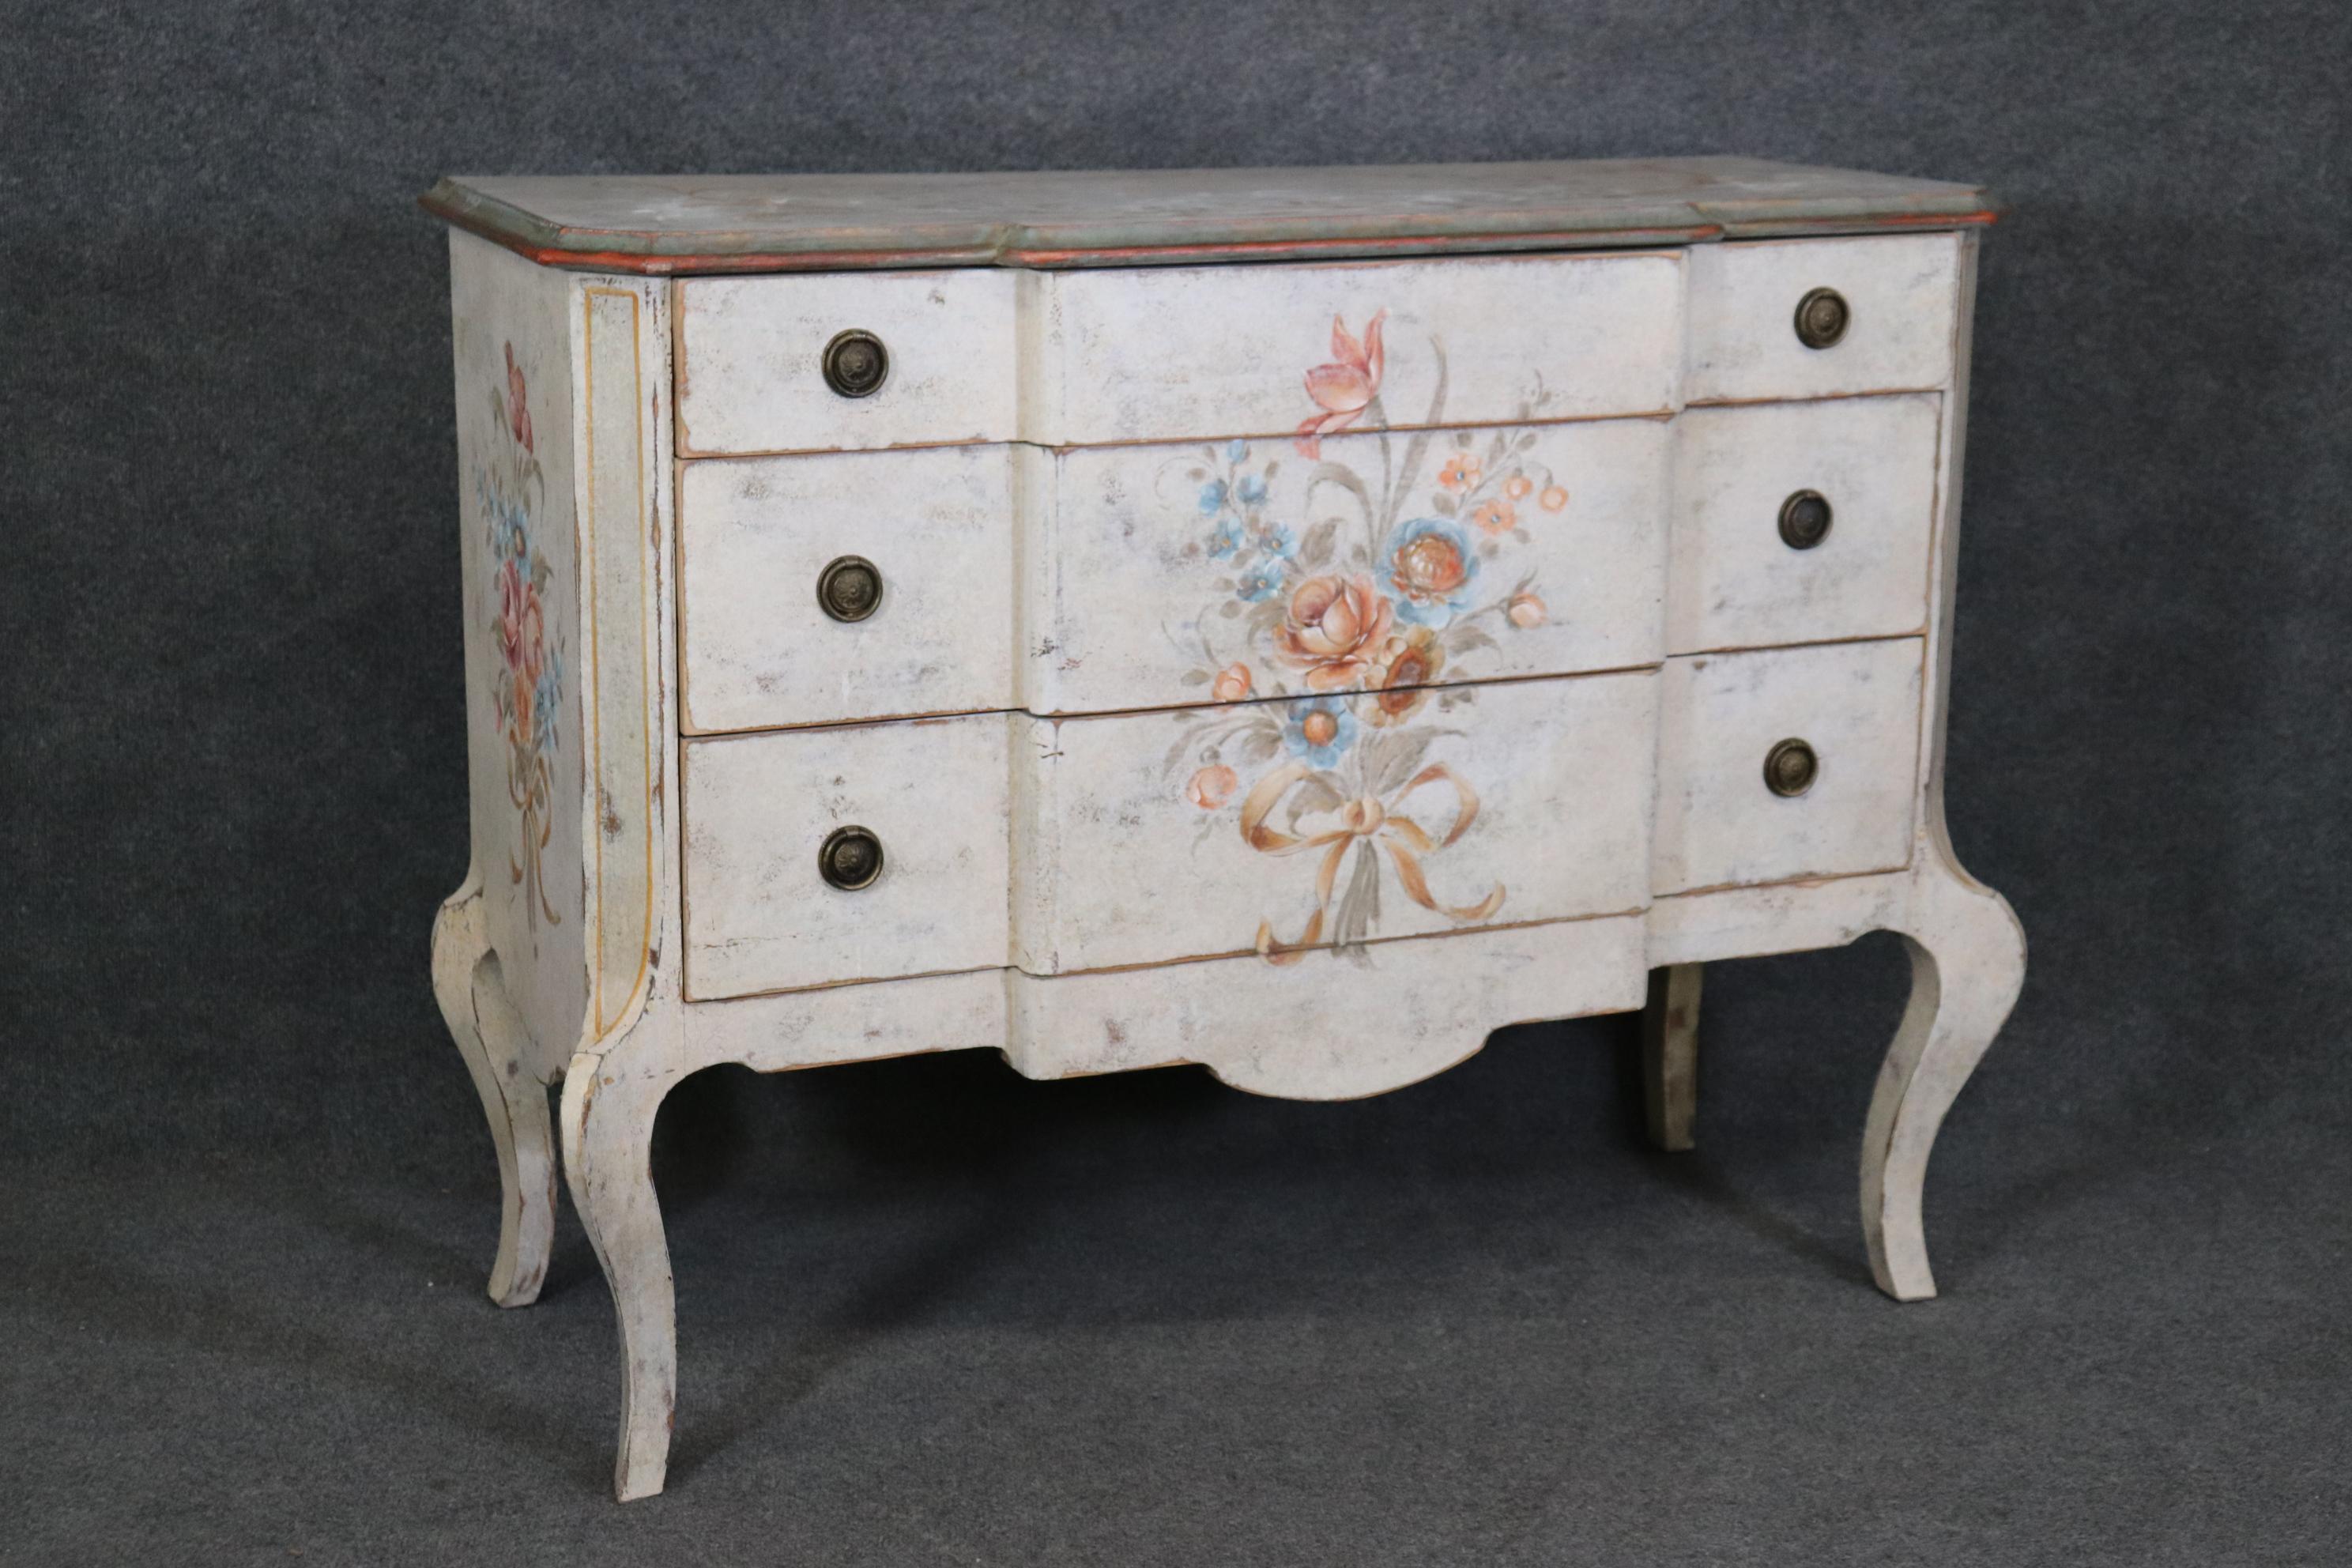 This is a fantastic time-worn distressed paint decorated commode that is designed in the Louis XV but made in Italy. The painting and distressed finish really give that beachy cottage look. The piece is an incredibly beautiful piece of art for your